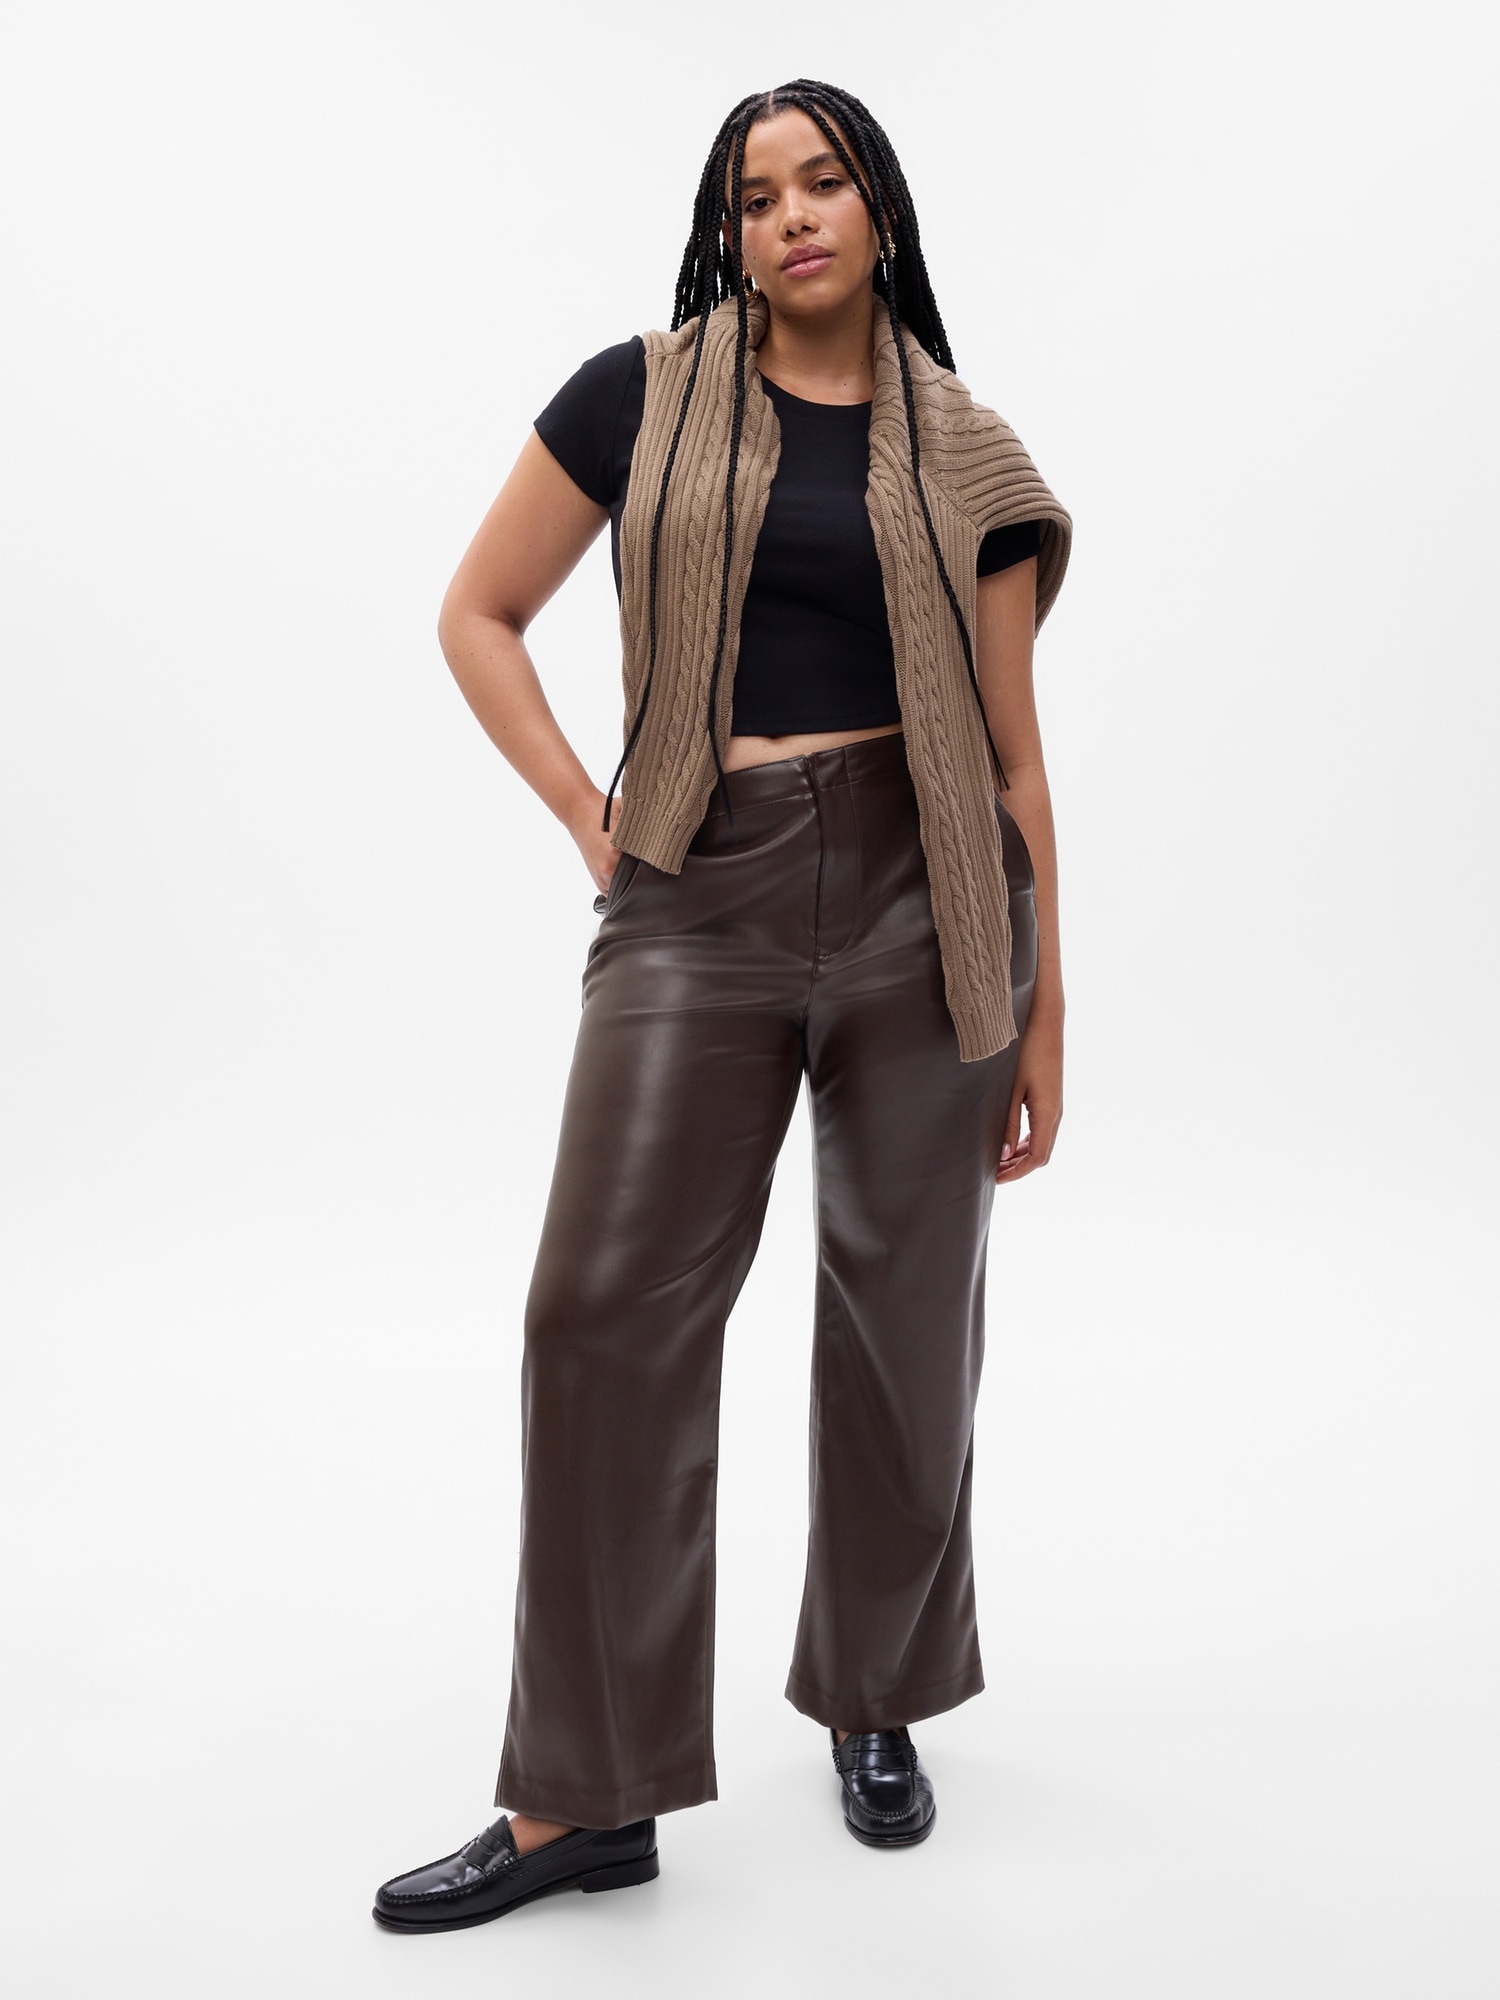 Mid-Rise Flared Leather Trousers